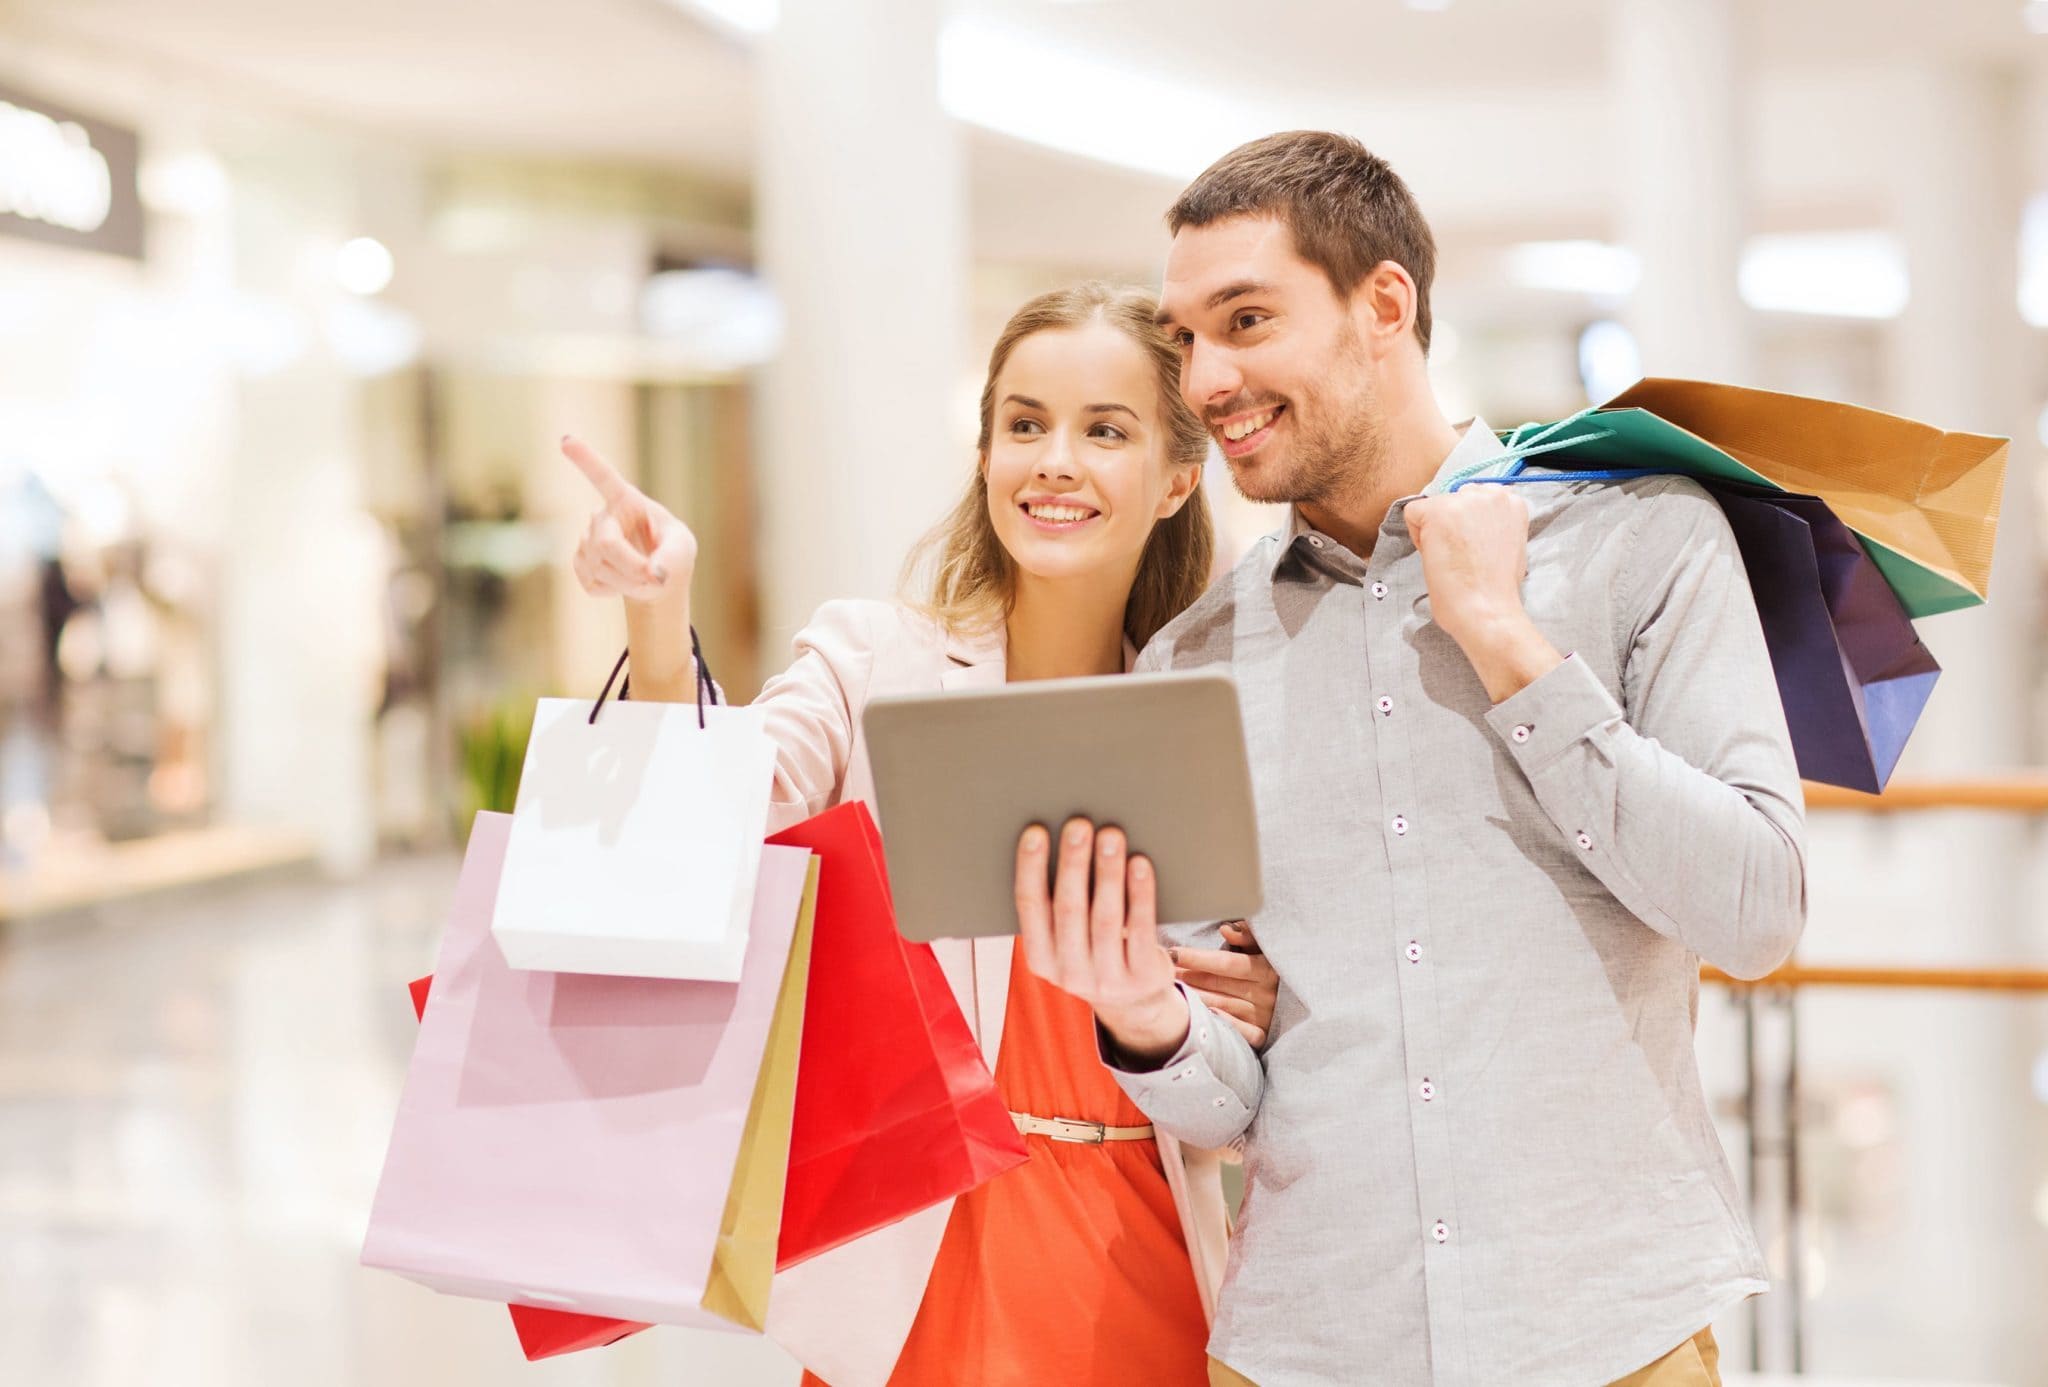 Deliver a complete shopping experience: Here’s how